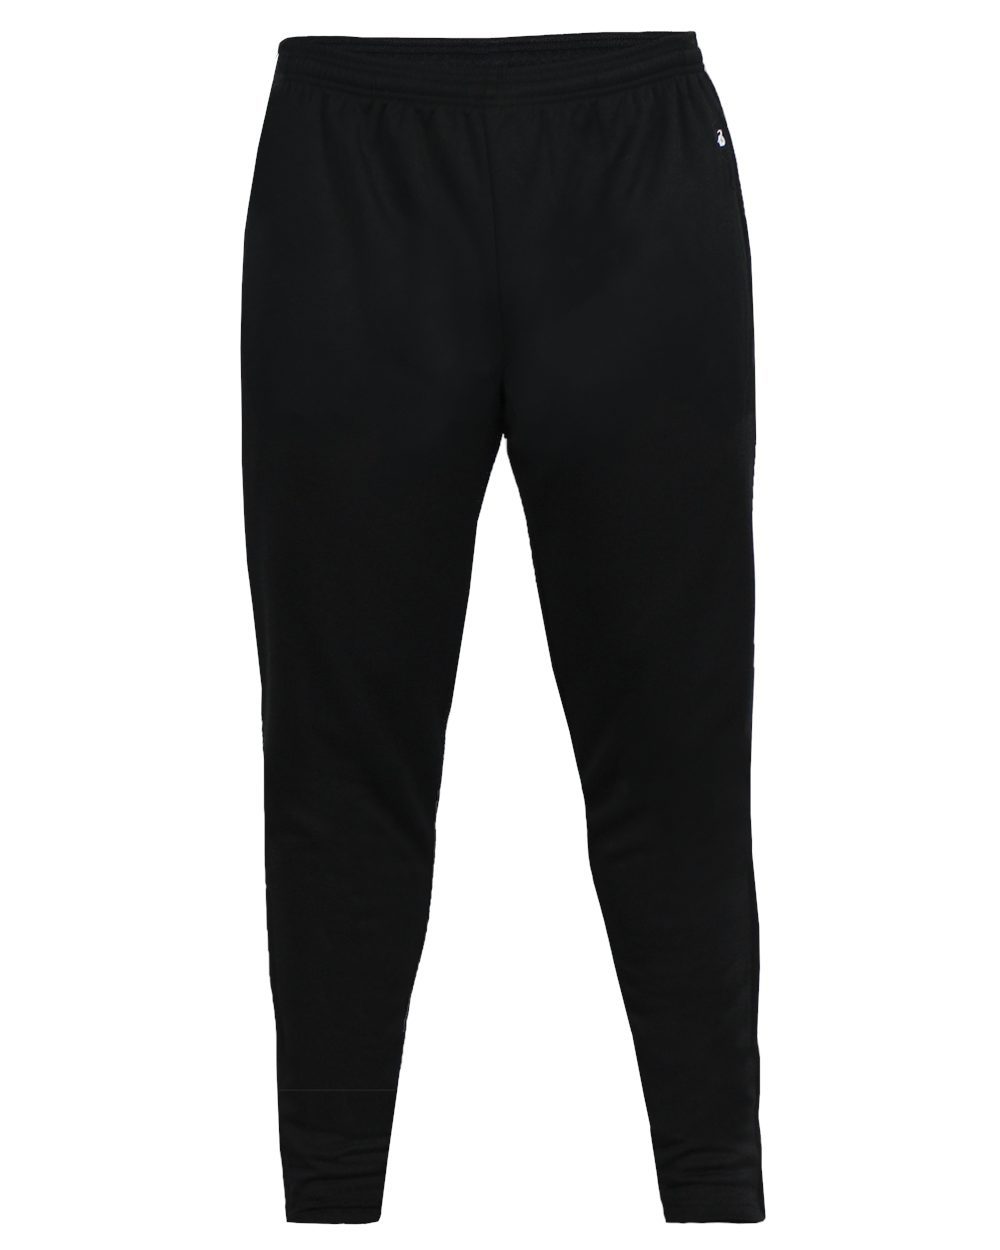 Badger 2575 - Youth Trainer Pants